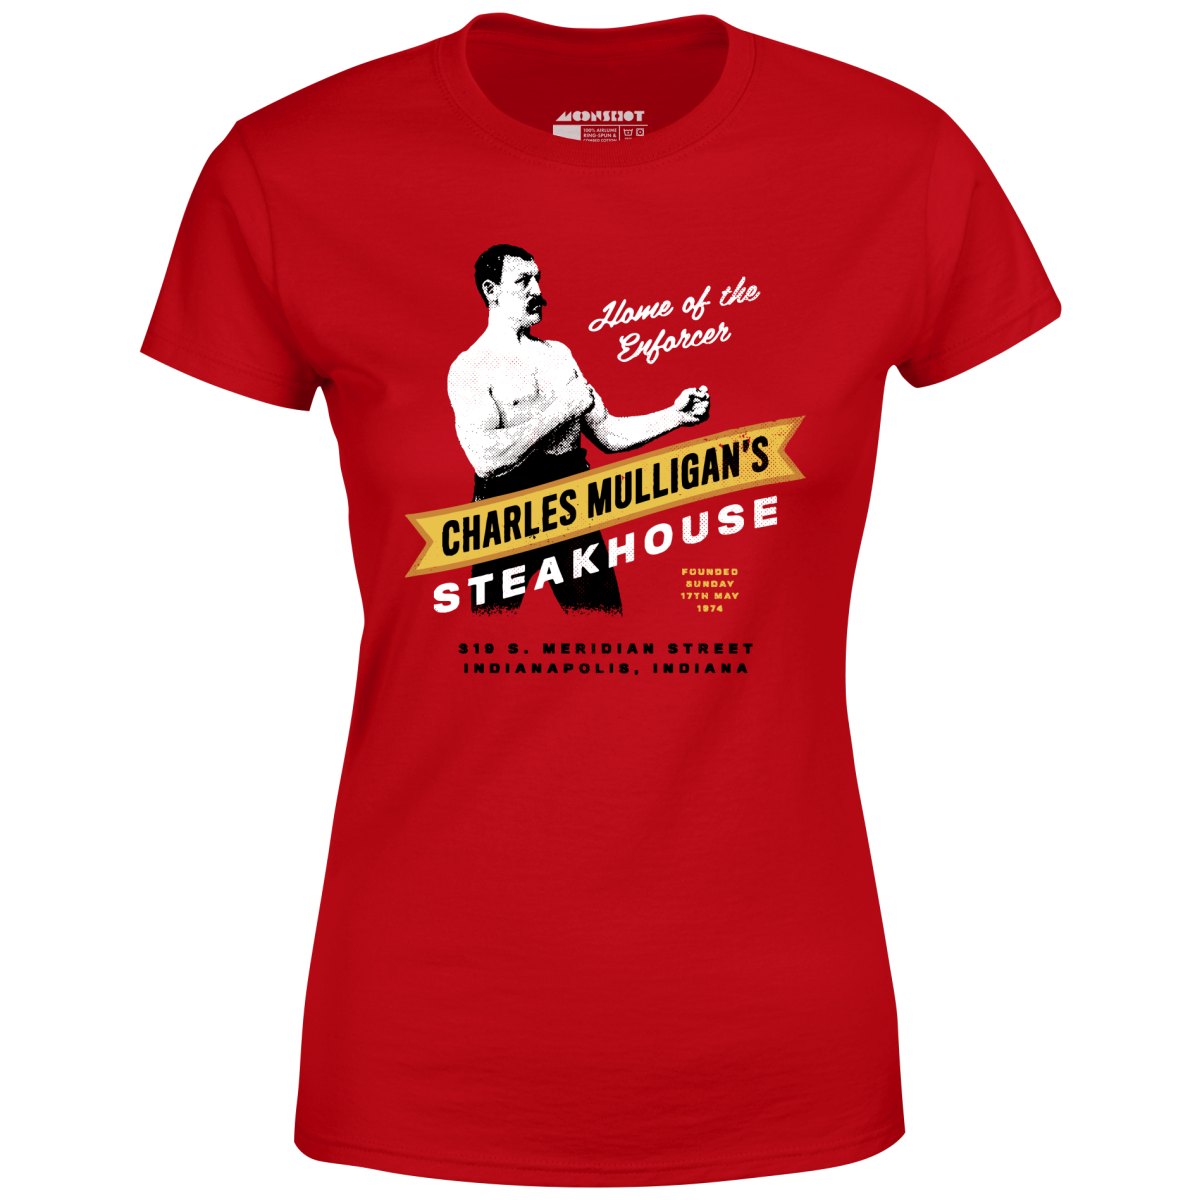 Charles Mulligan's Steakhouse - Parks and Recreation - Women's T-Shirt